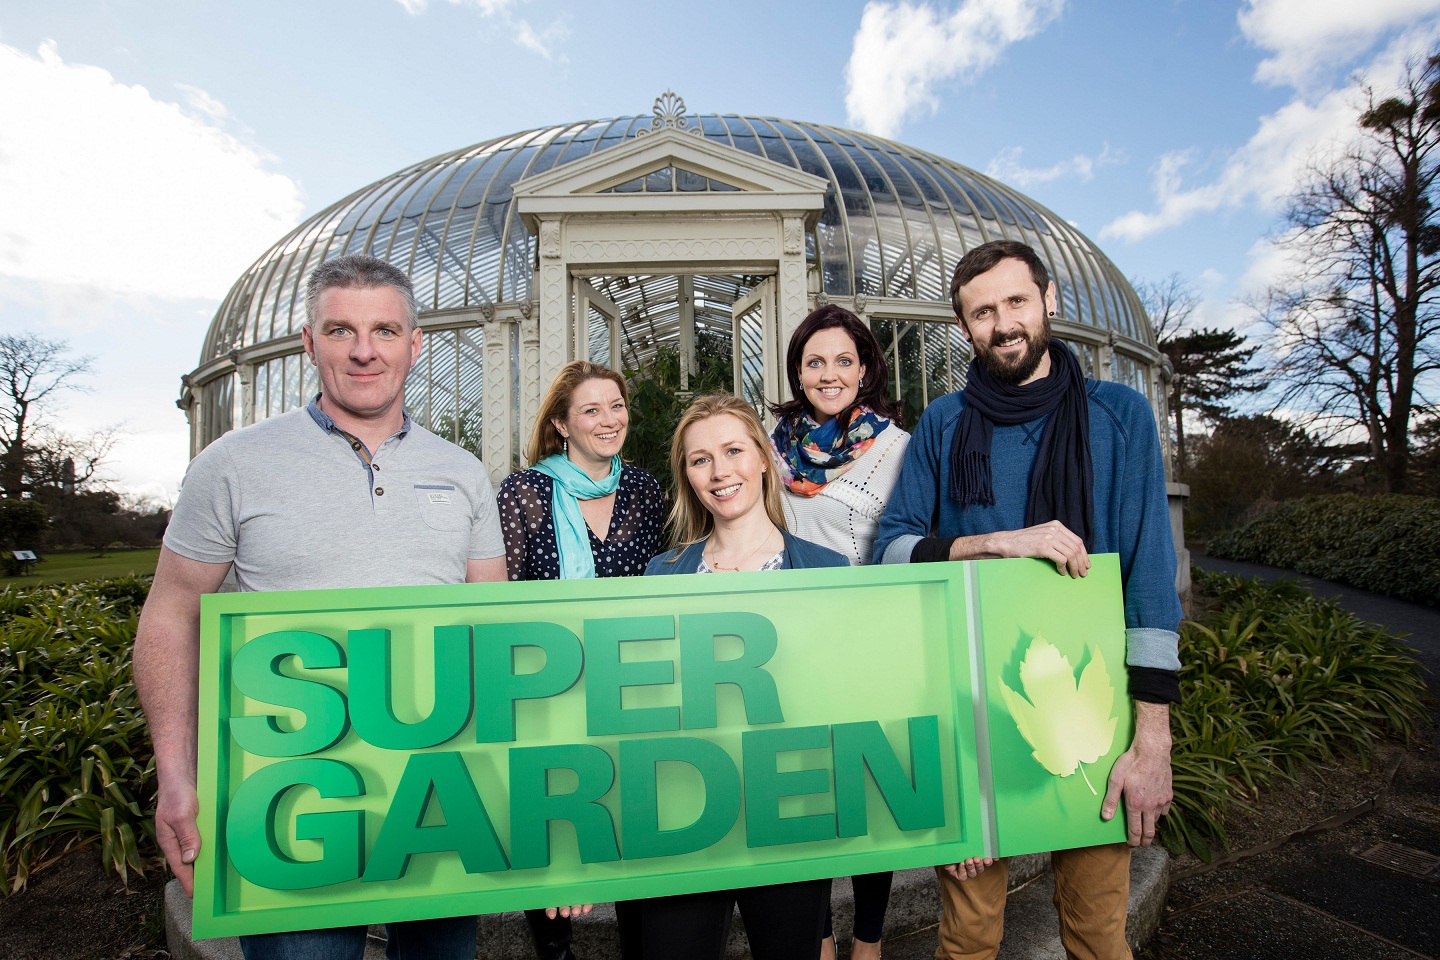 Super Garden is on the hunt for budding designers and gardens in need